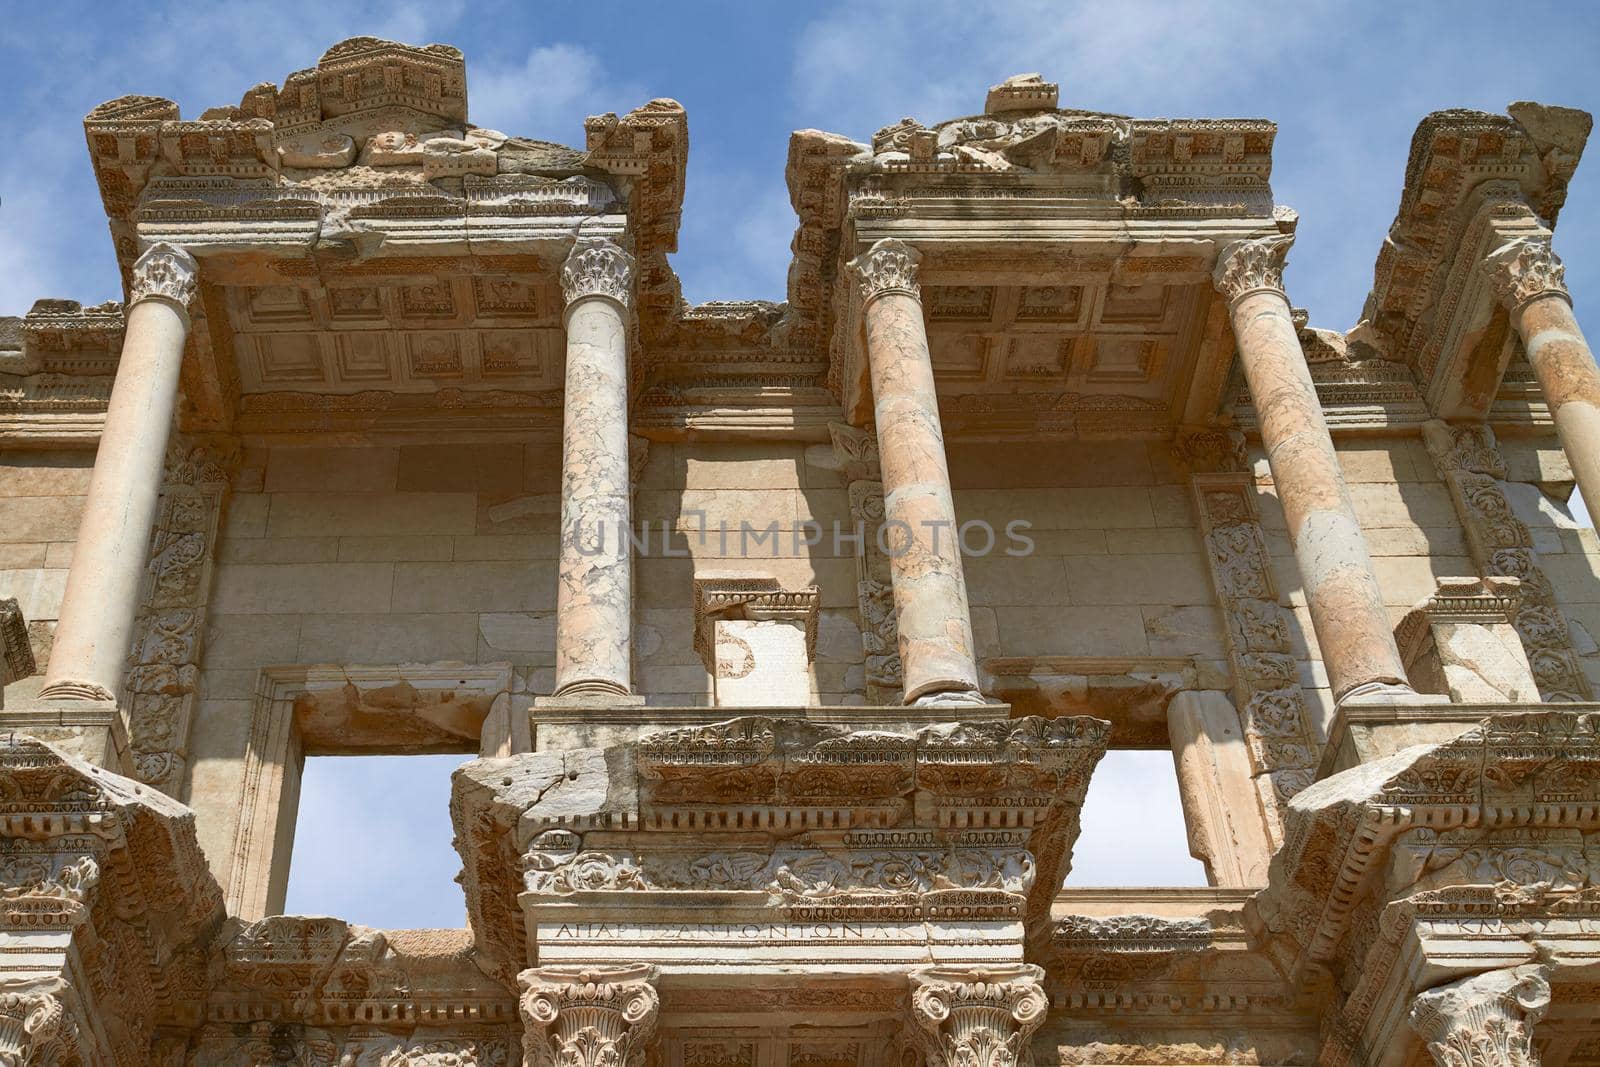 Facade of Ancient Celsus Library in Ephesus Turkey. Ephesus Contains  Large Collection of Roman Ruins.